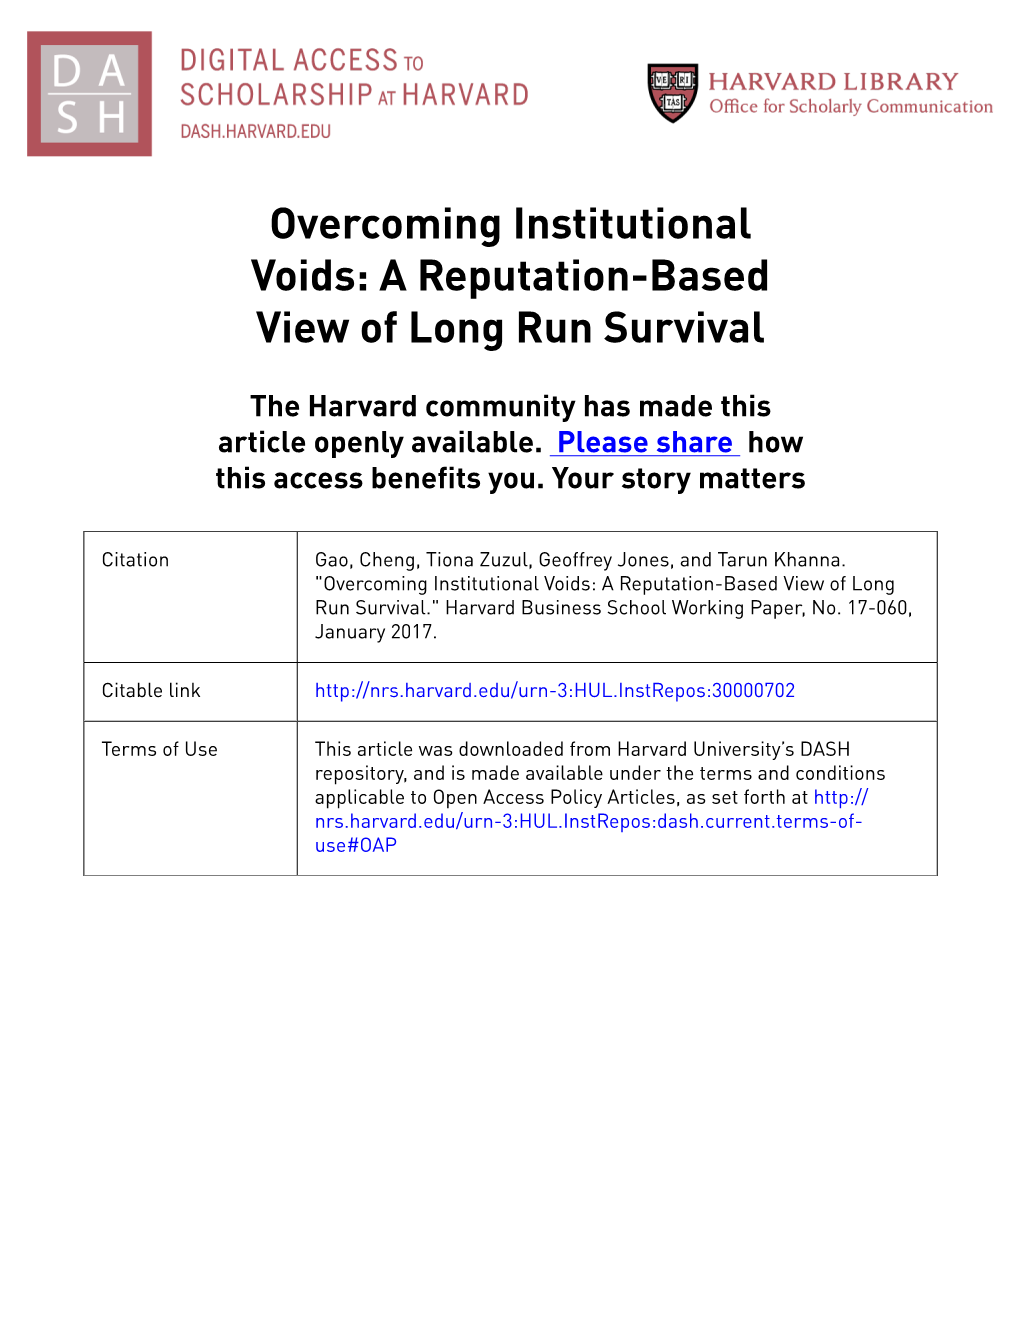 Overcoming Institutional Voids: a Reputation-Based View of Long Run Survival